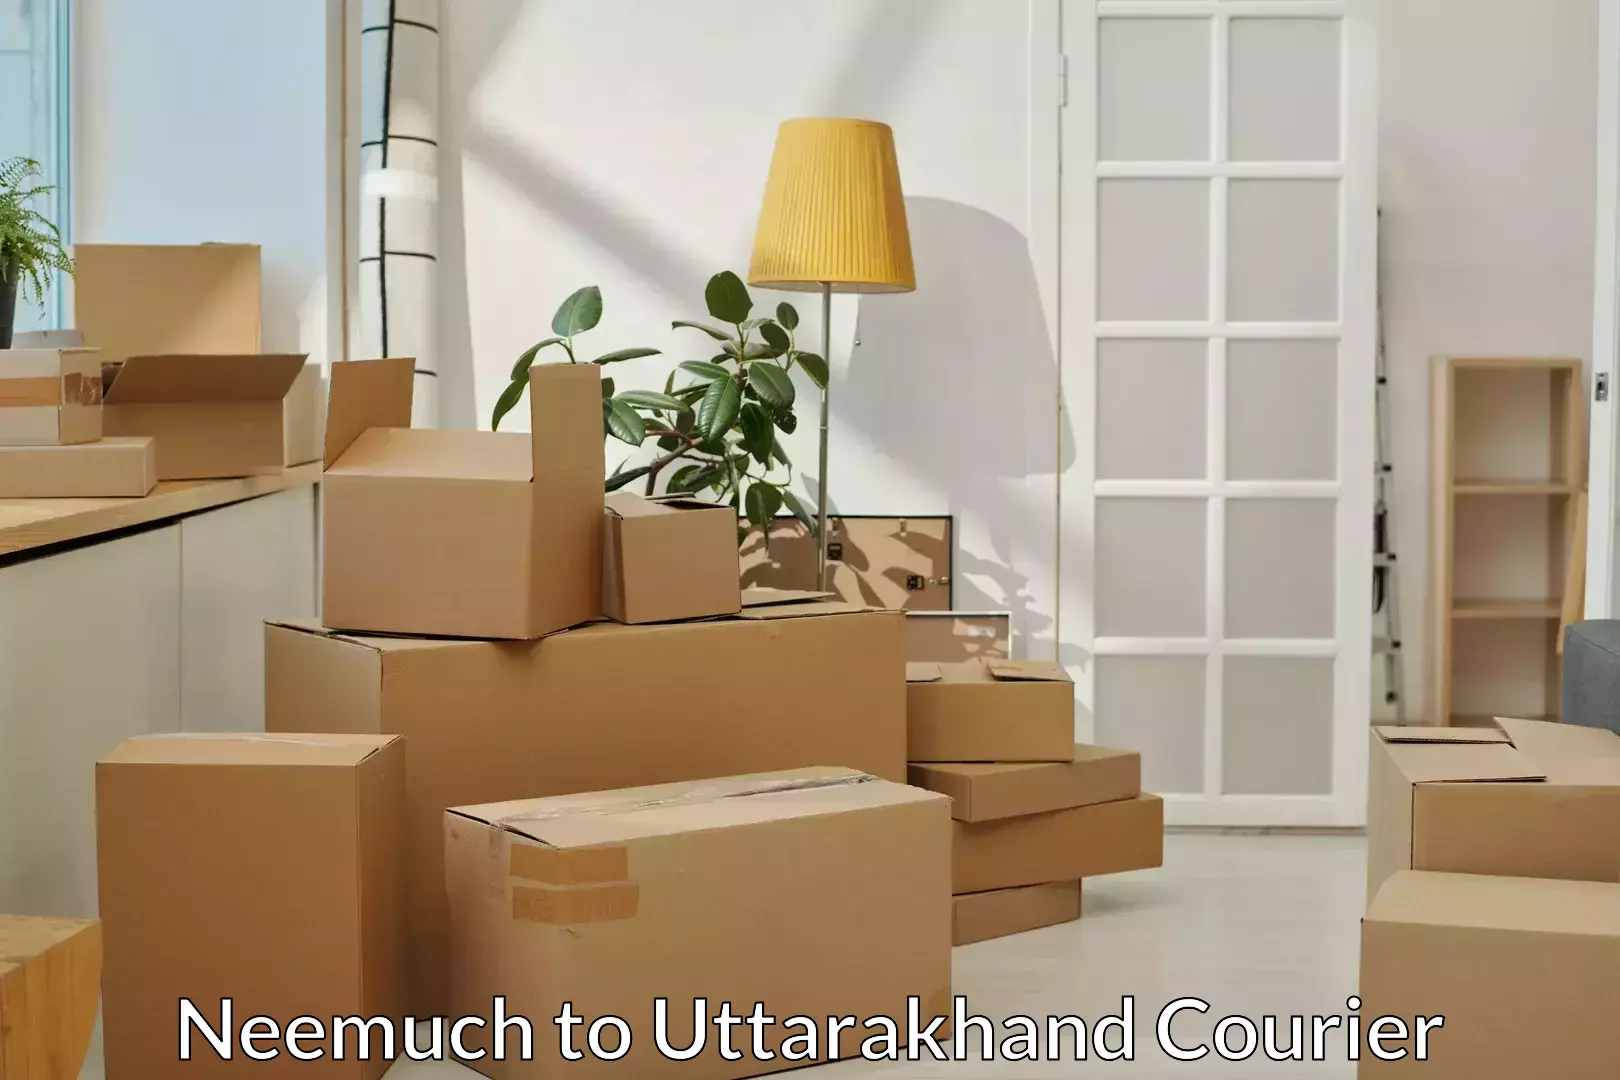 Moving and packing experts Neemuch to Rudrapur